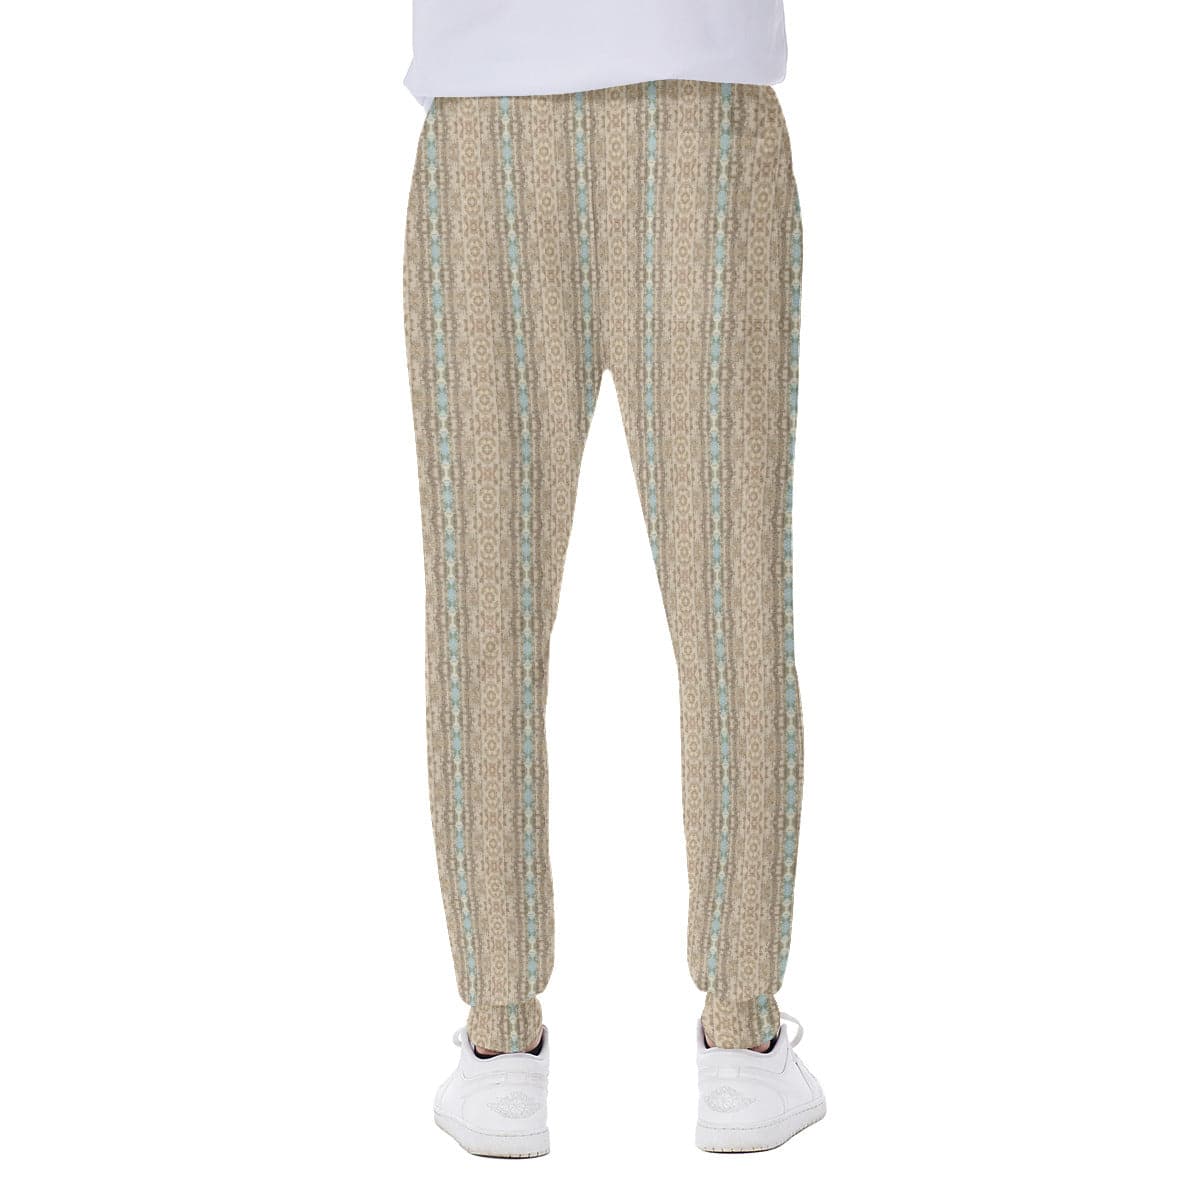 Sand and Sea green Men's Sports and activity Sweatpants, by Sensus Studio Design